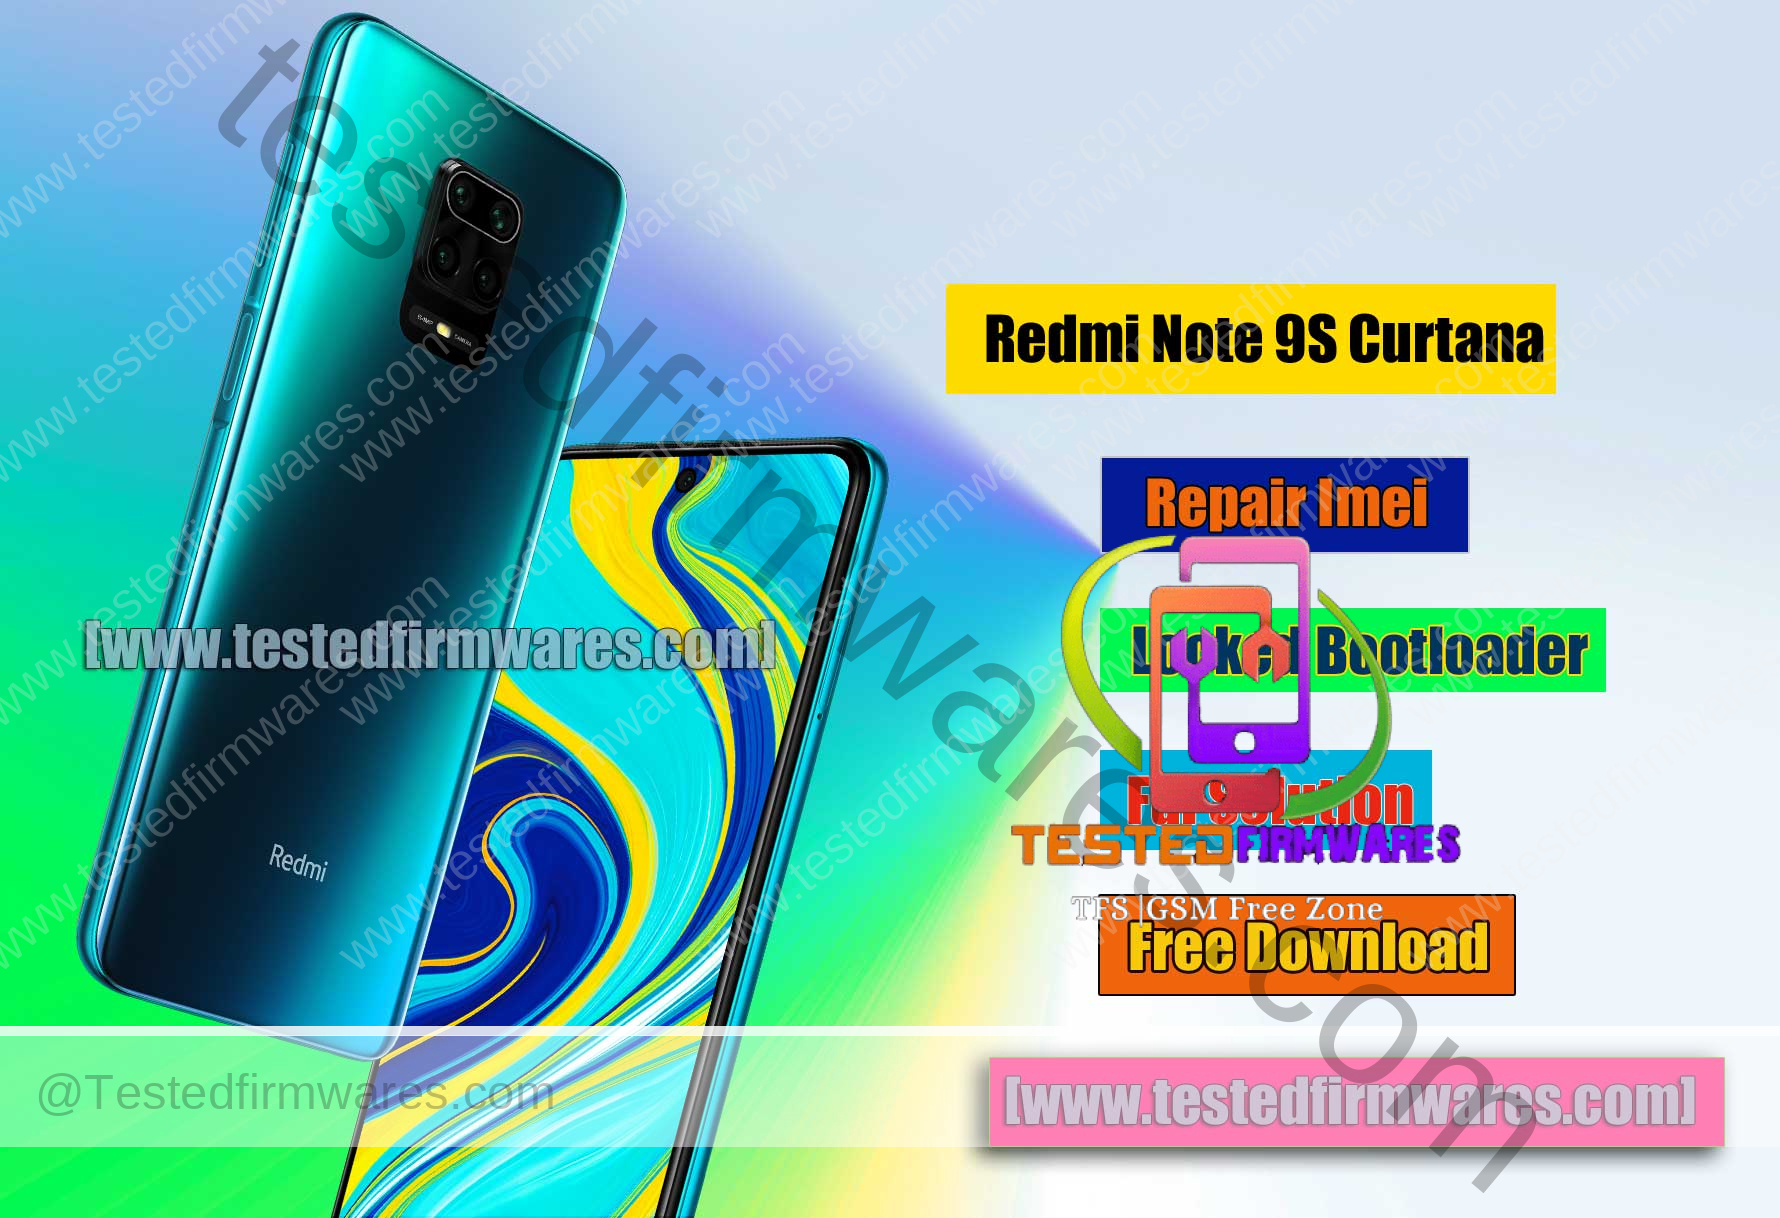 Redmi Note 9S Curtana Repair Imei Locked Bootloader Solution By[www.testedfirmwares.com]